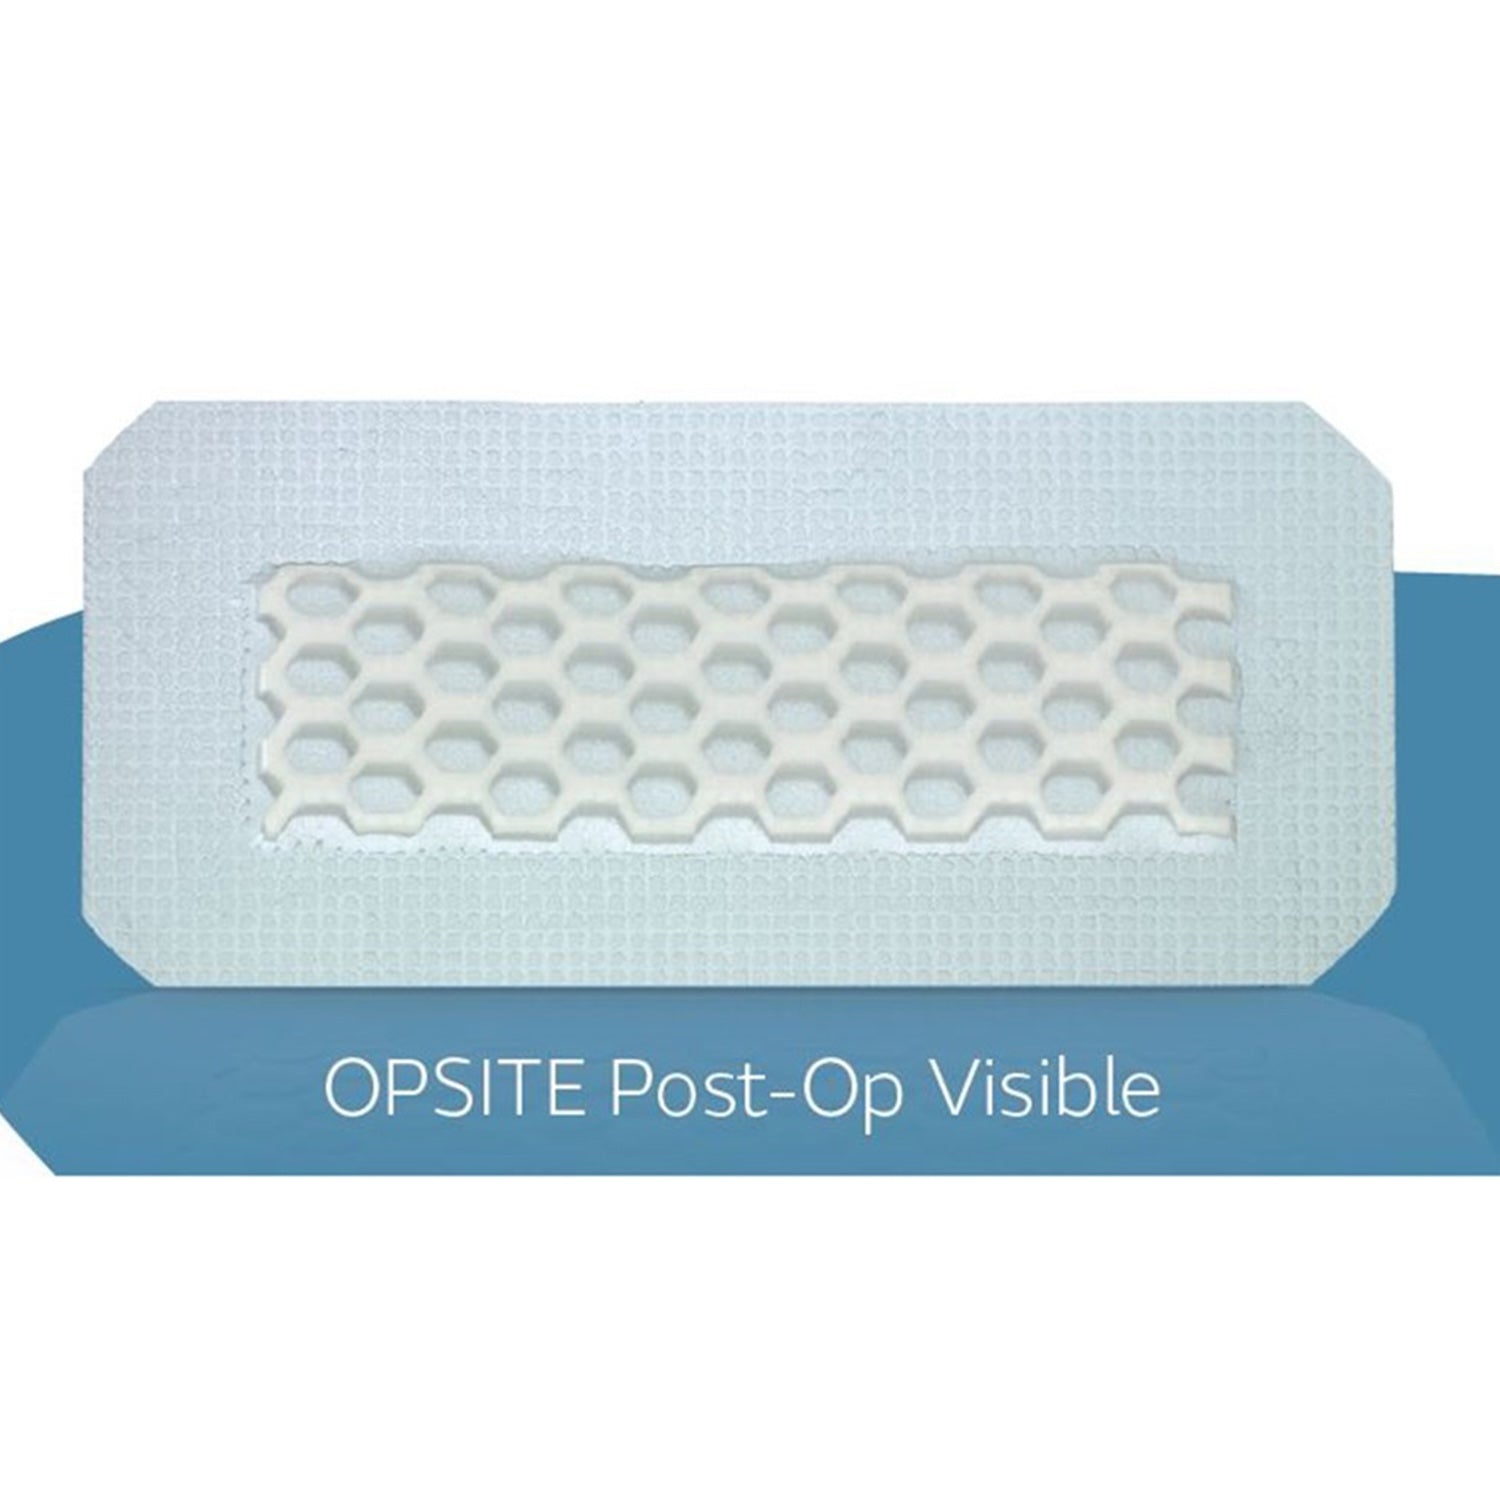 Opsite Post Op Visible | 20 x 10cm | x20 (6)